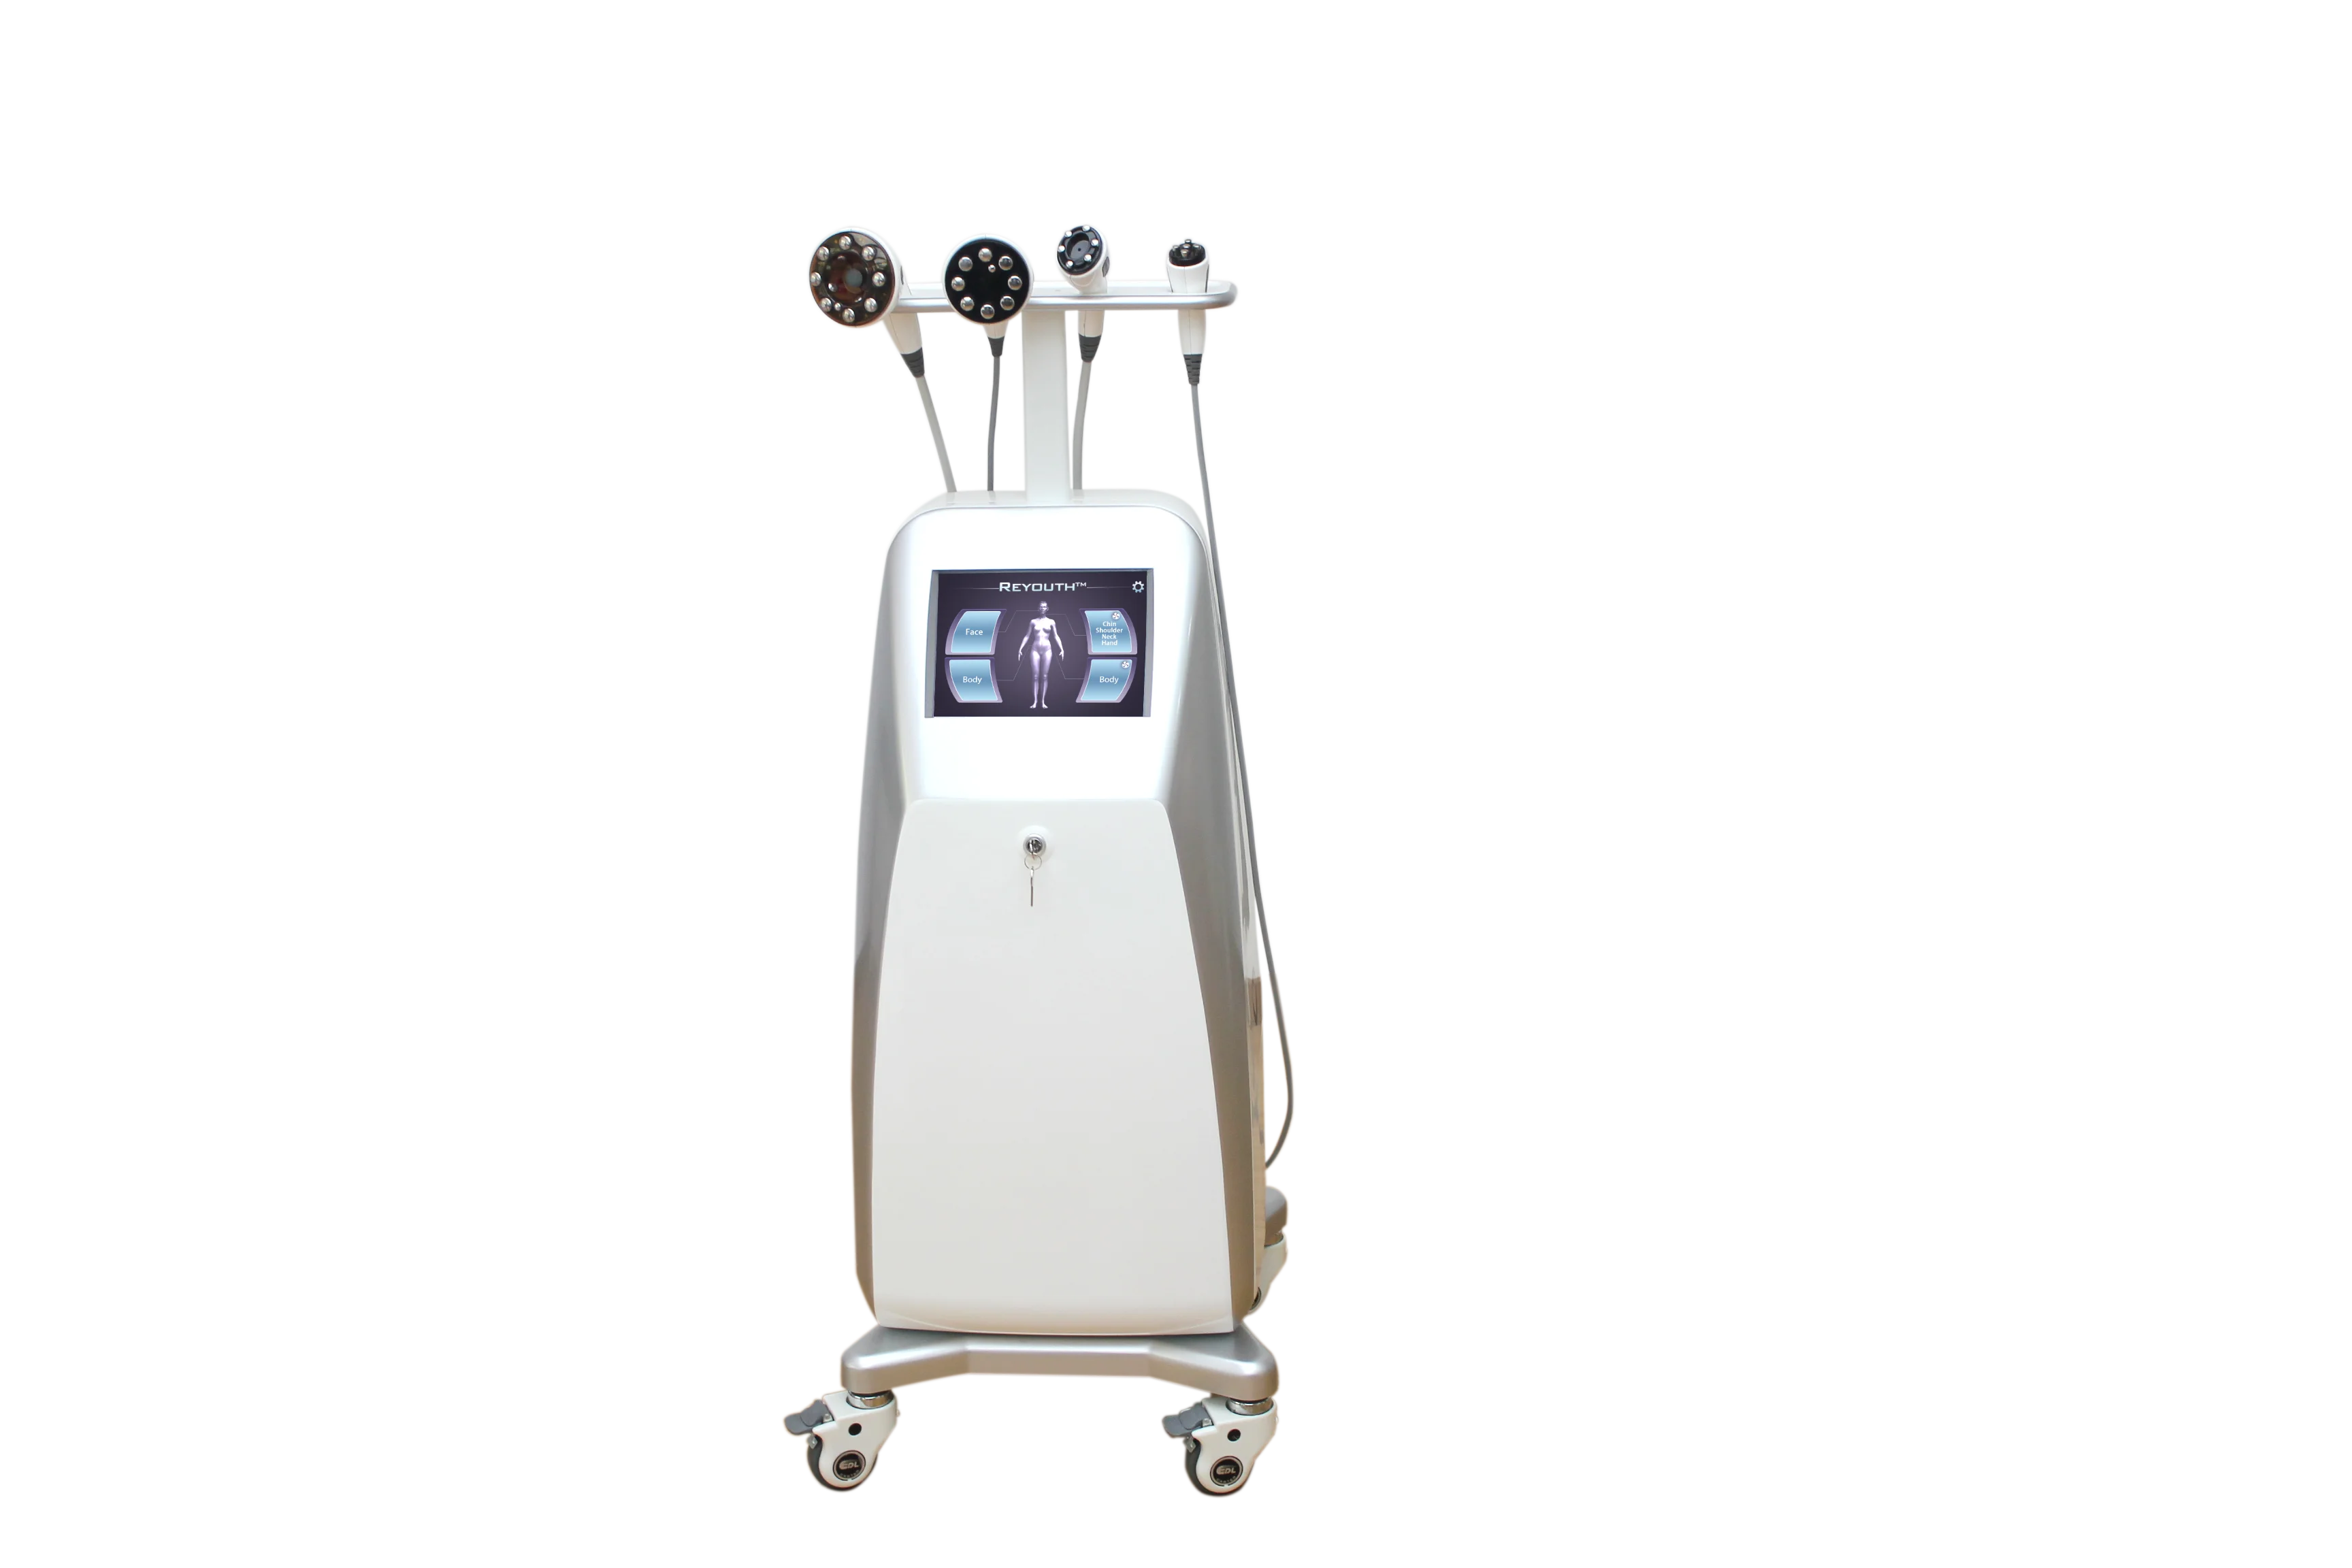 4D layered  Legacy anti-aging Multi poles Radio Frequency, LEDPDT, Vacuum, slimming, Body contouring machine